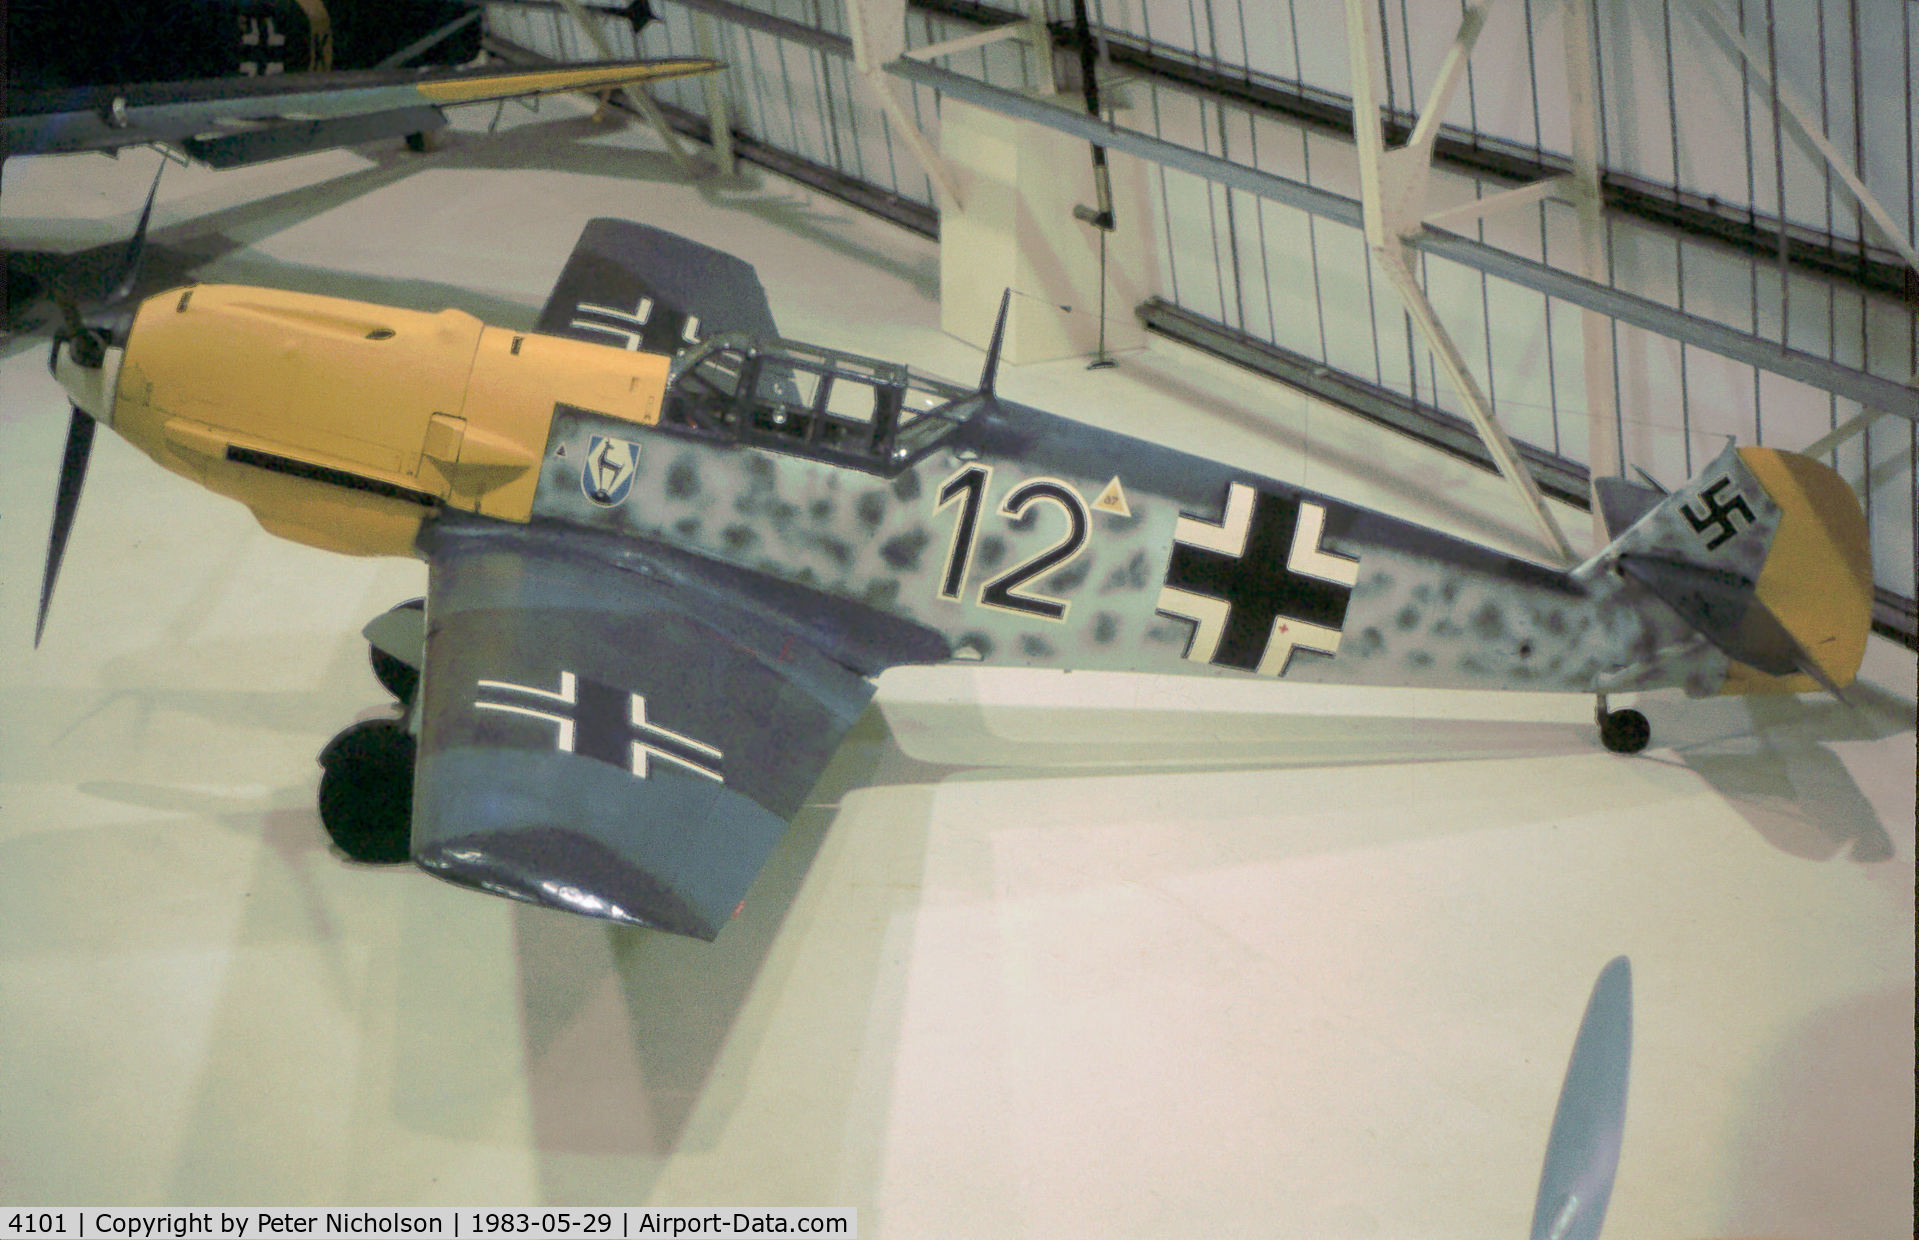 4101, 1940 Messerschmitt Bf-109E-3/B C/N 4101, Bf-109E known as Black 12 on display at the RAF Museum at Hendon as seen in May 1983.